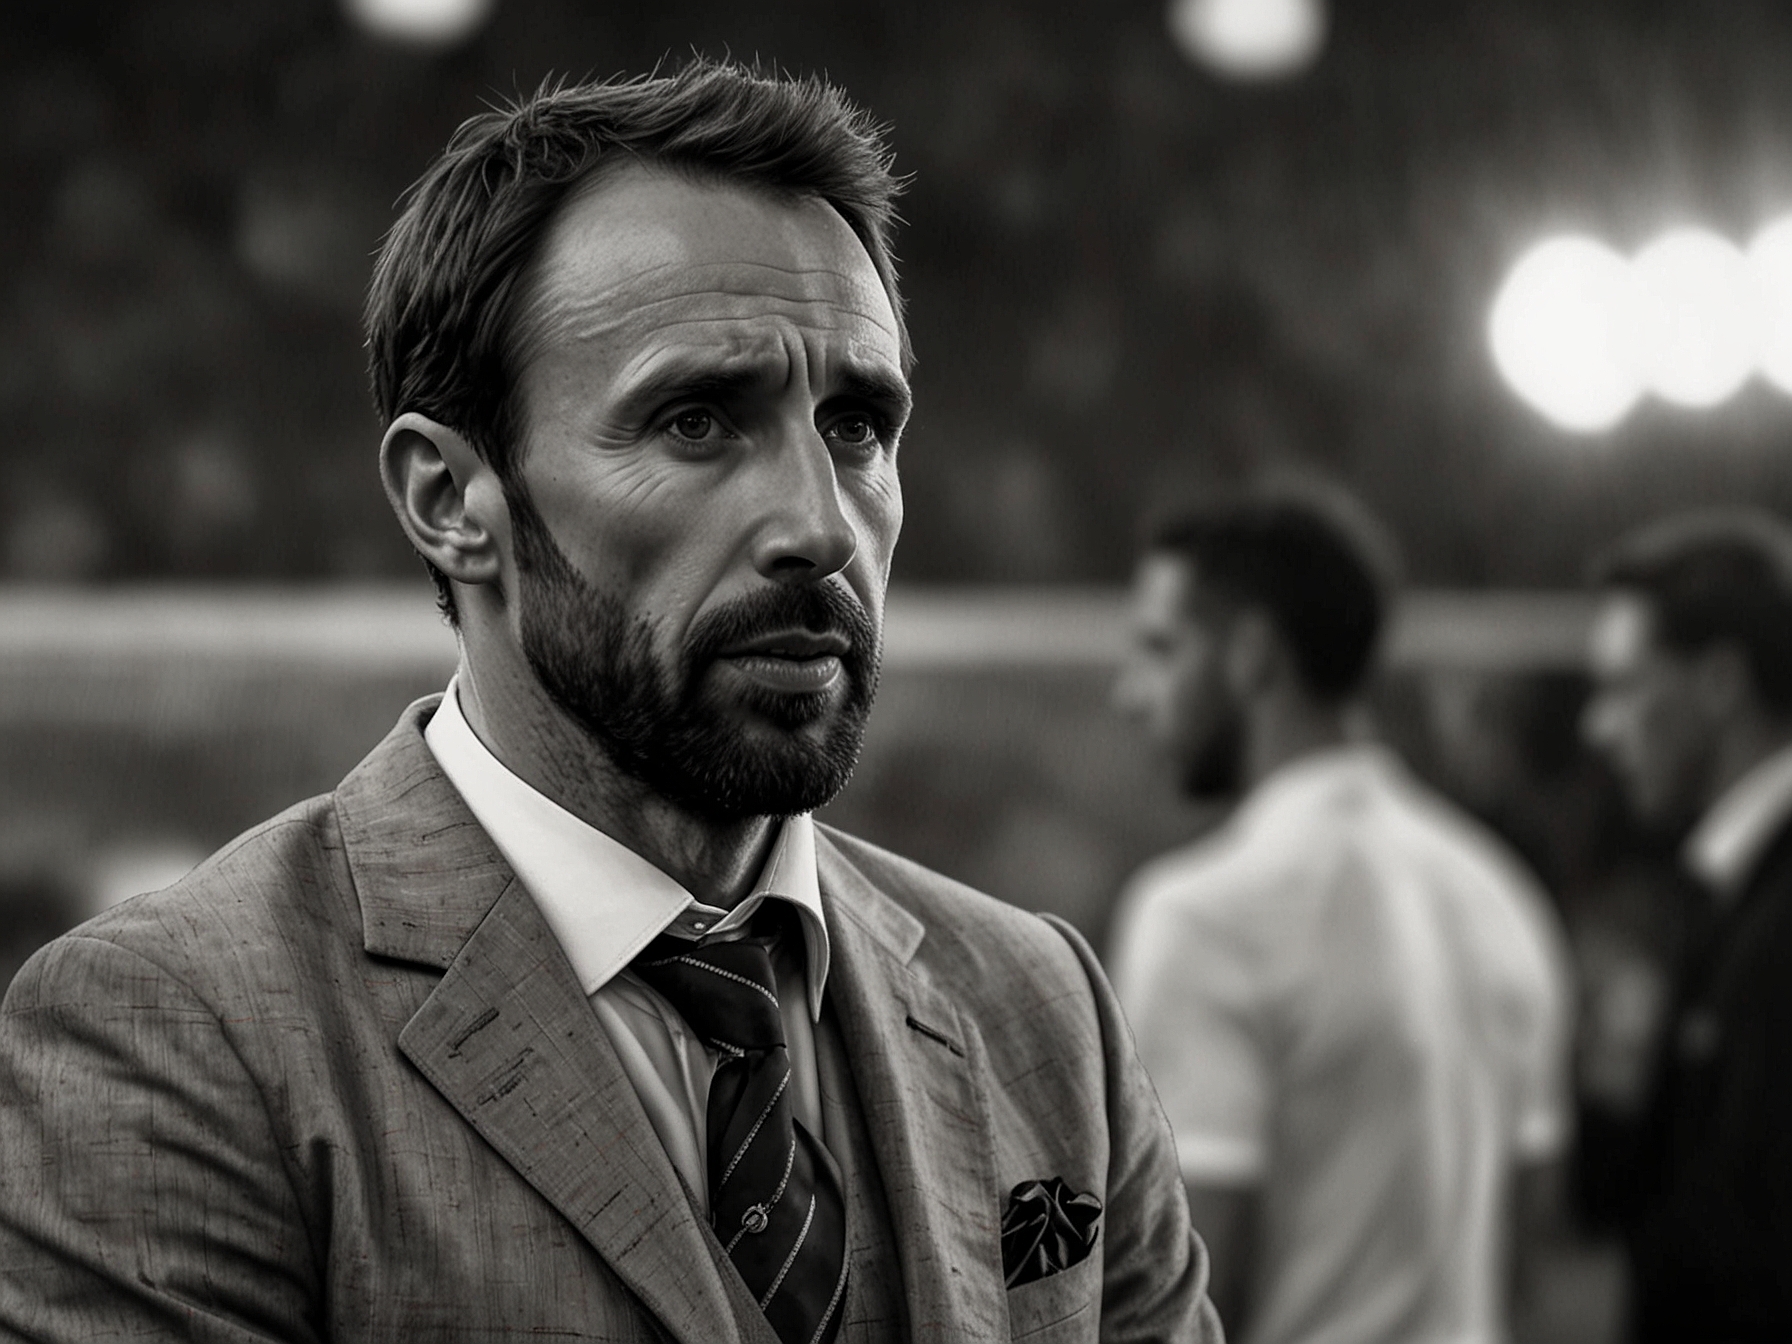 Gareth Southgate during a post-match interview, expressing concerns about the lack of effort and intensity from England players after the disappointing draw against Denmark.